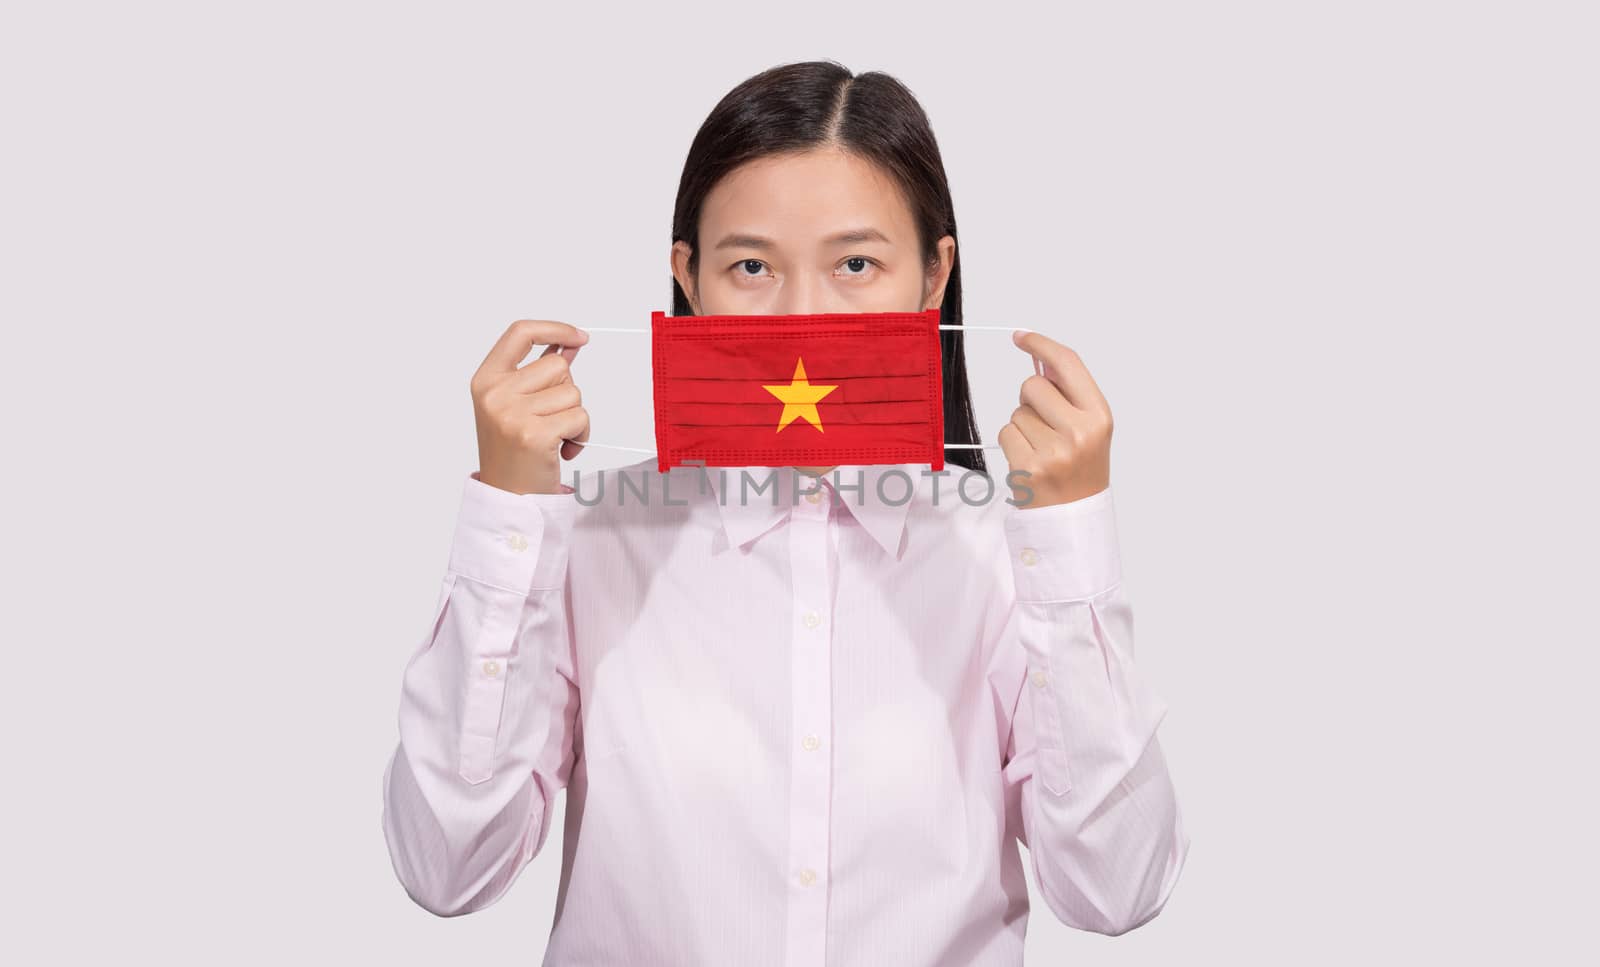 Asian woman wearing hygienic face mask painting Vietnam flag to protect from the Coronavirus 2019 (COVID-19) infection outbreak situation, the virus originated from Wuhan, China.